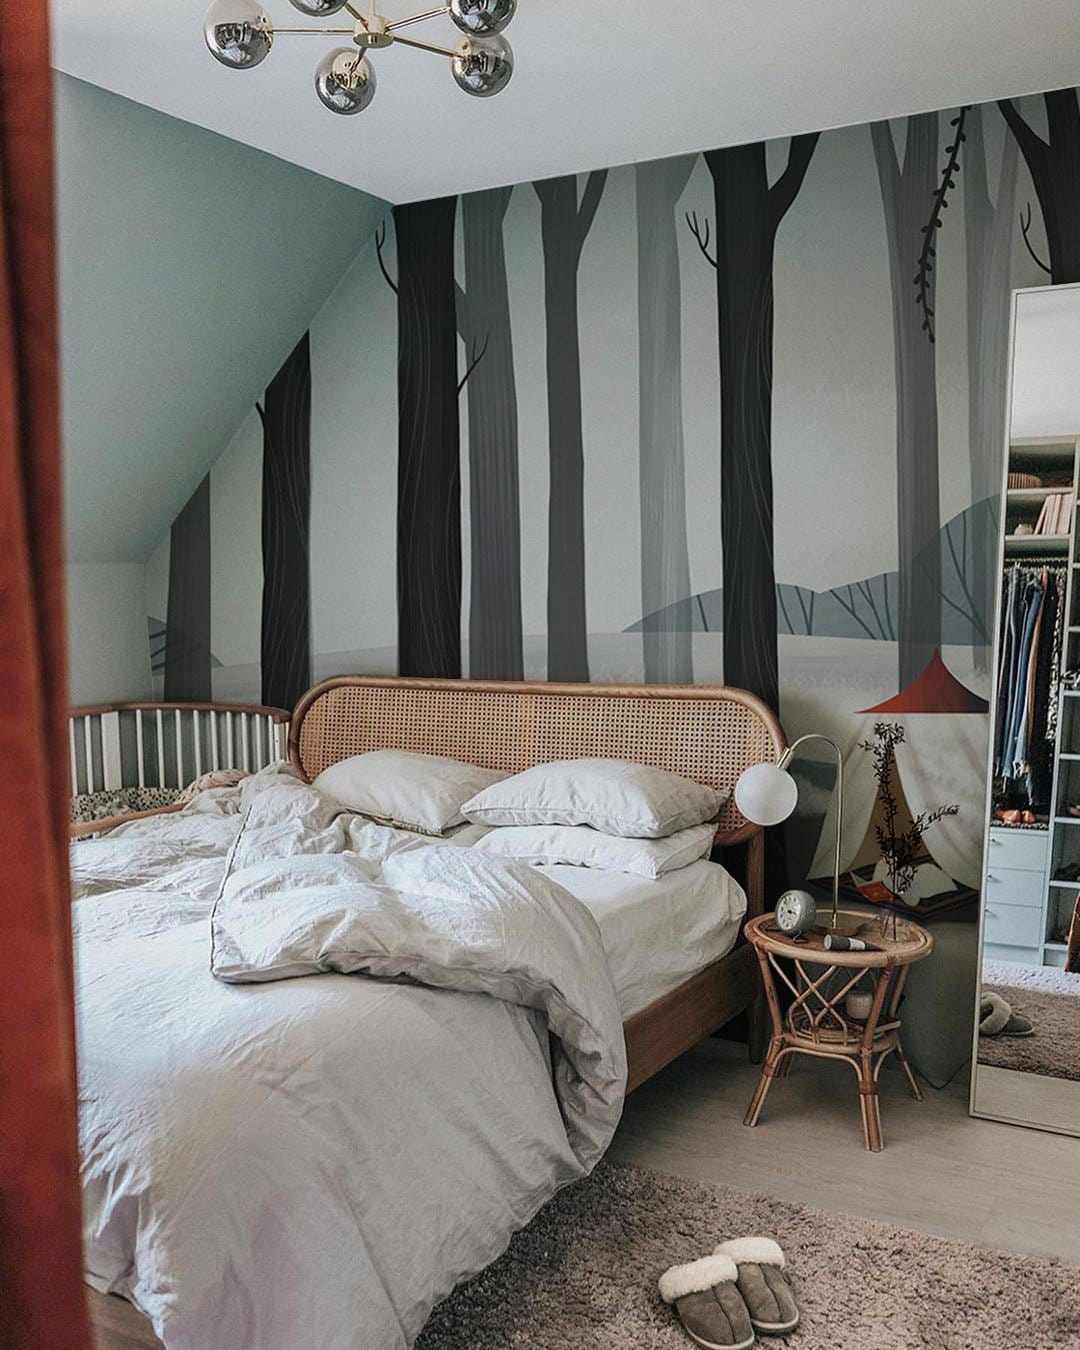 Wallpaper mural for bedroom decor with a person reading in the woods